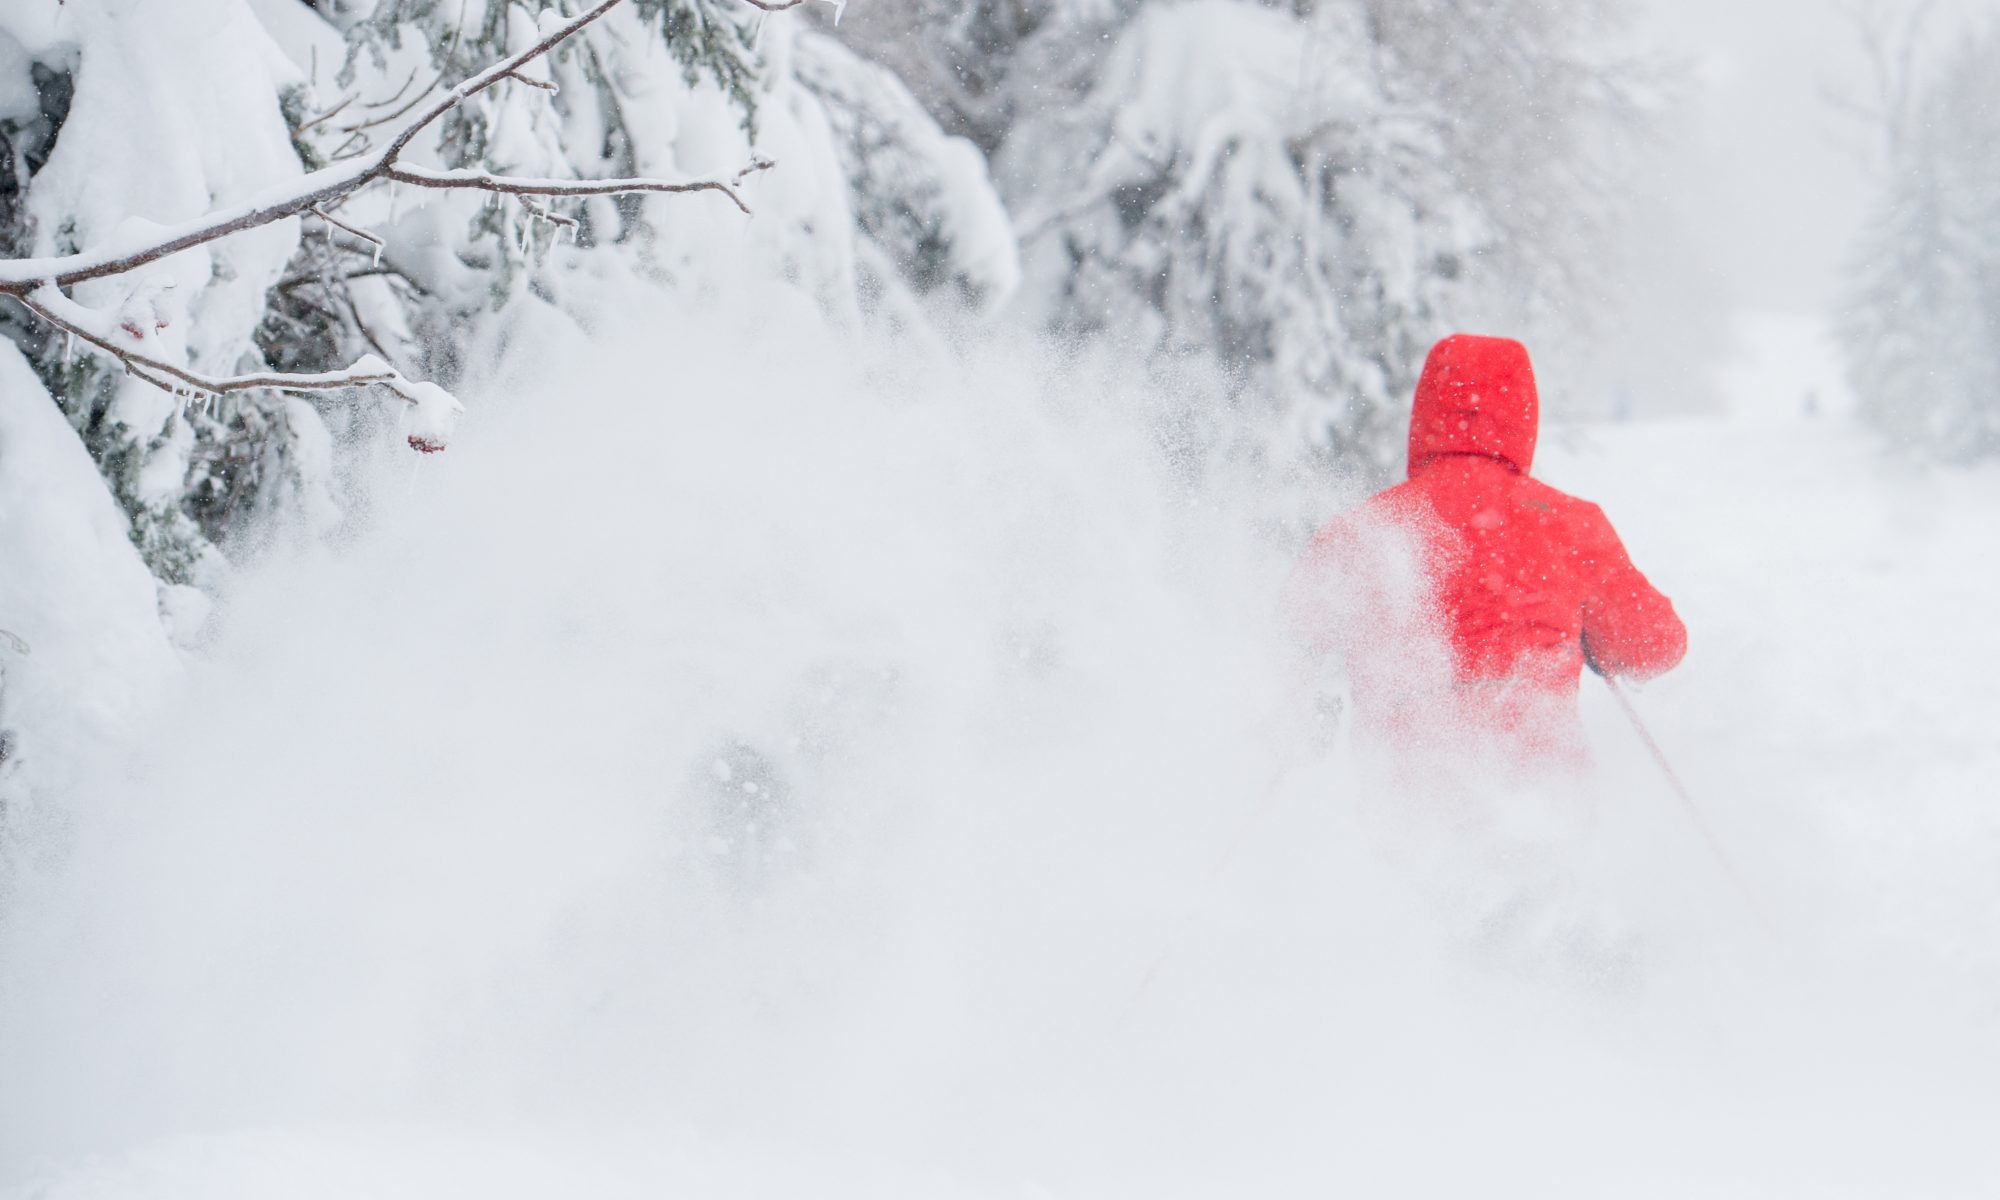 A great powder day at Mount Snow, part of Peak Resorts.Vail Resorts to Acquire Peak Resorts, Owner Of 17 U.S. Ski Areas